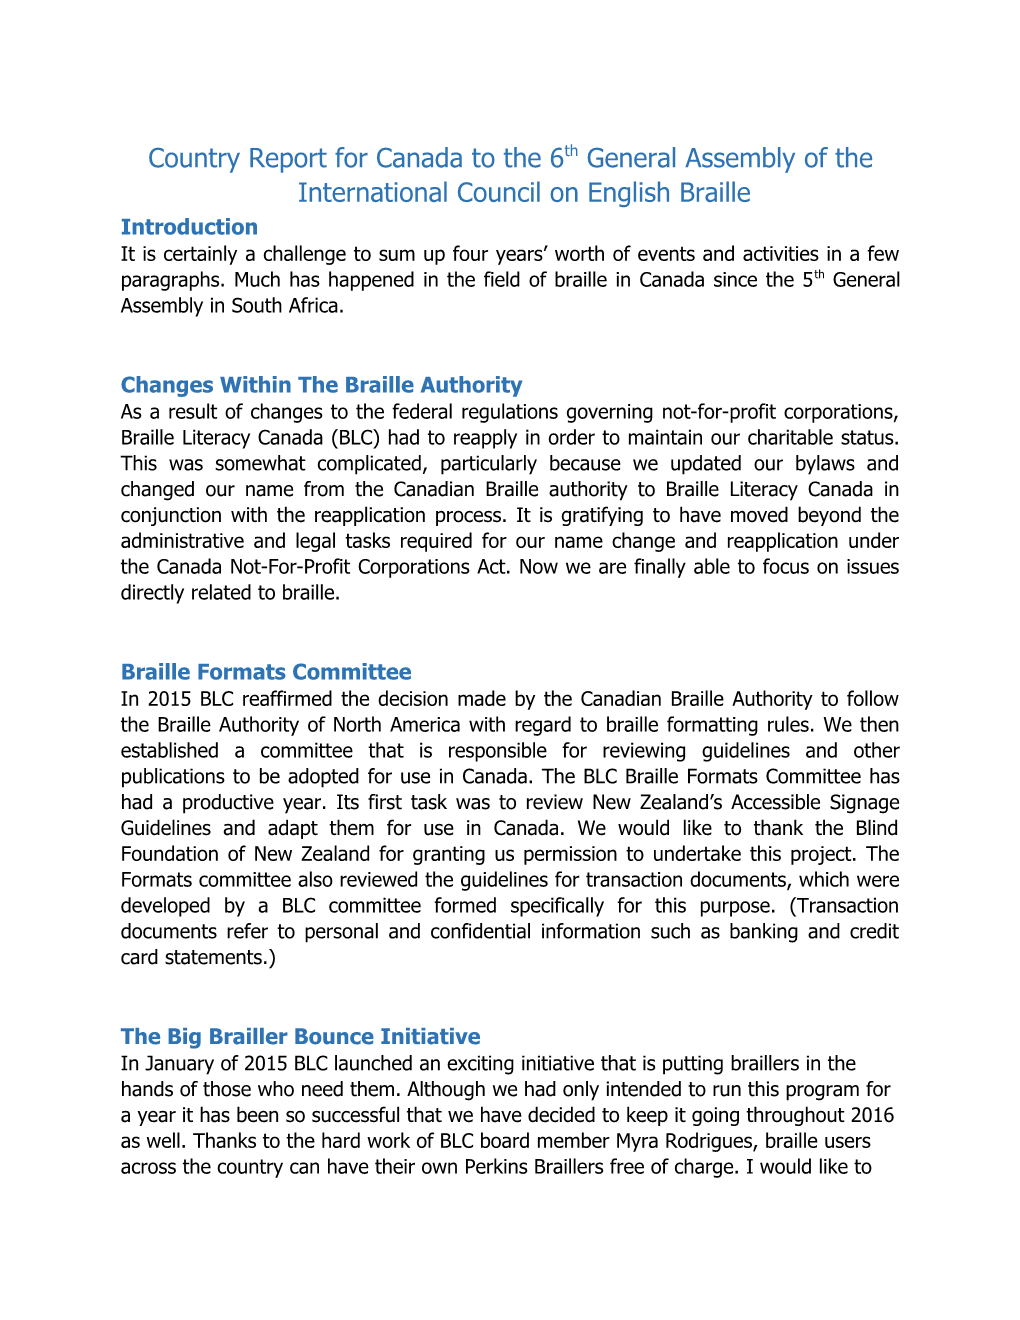 Country Report for Canada to the 6Th General Assembly of the International Council on English